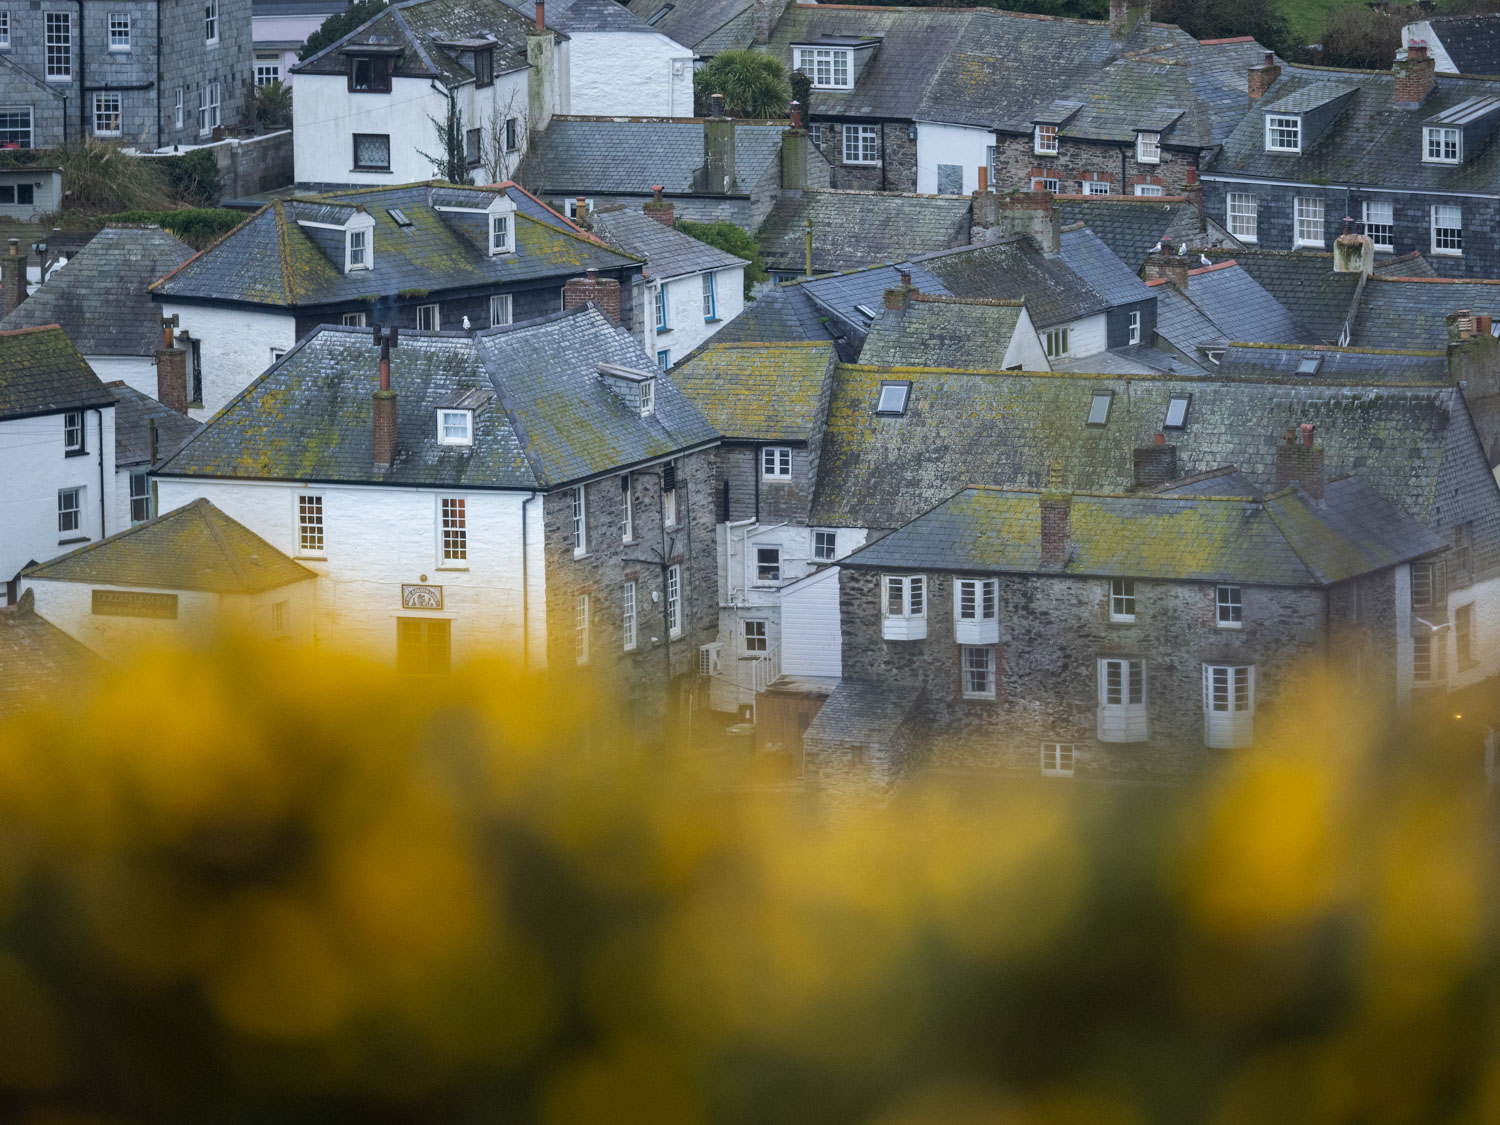 Photographing Port Isaac – The Doc Martin Village of Cornwall